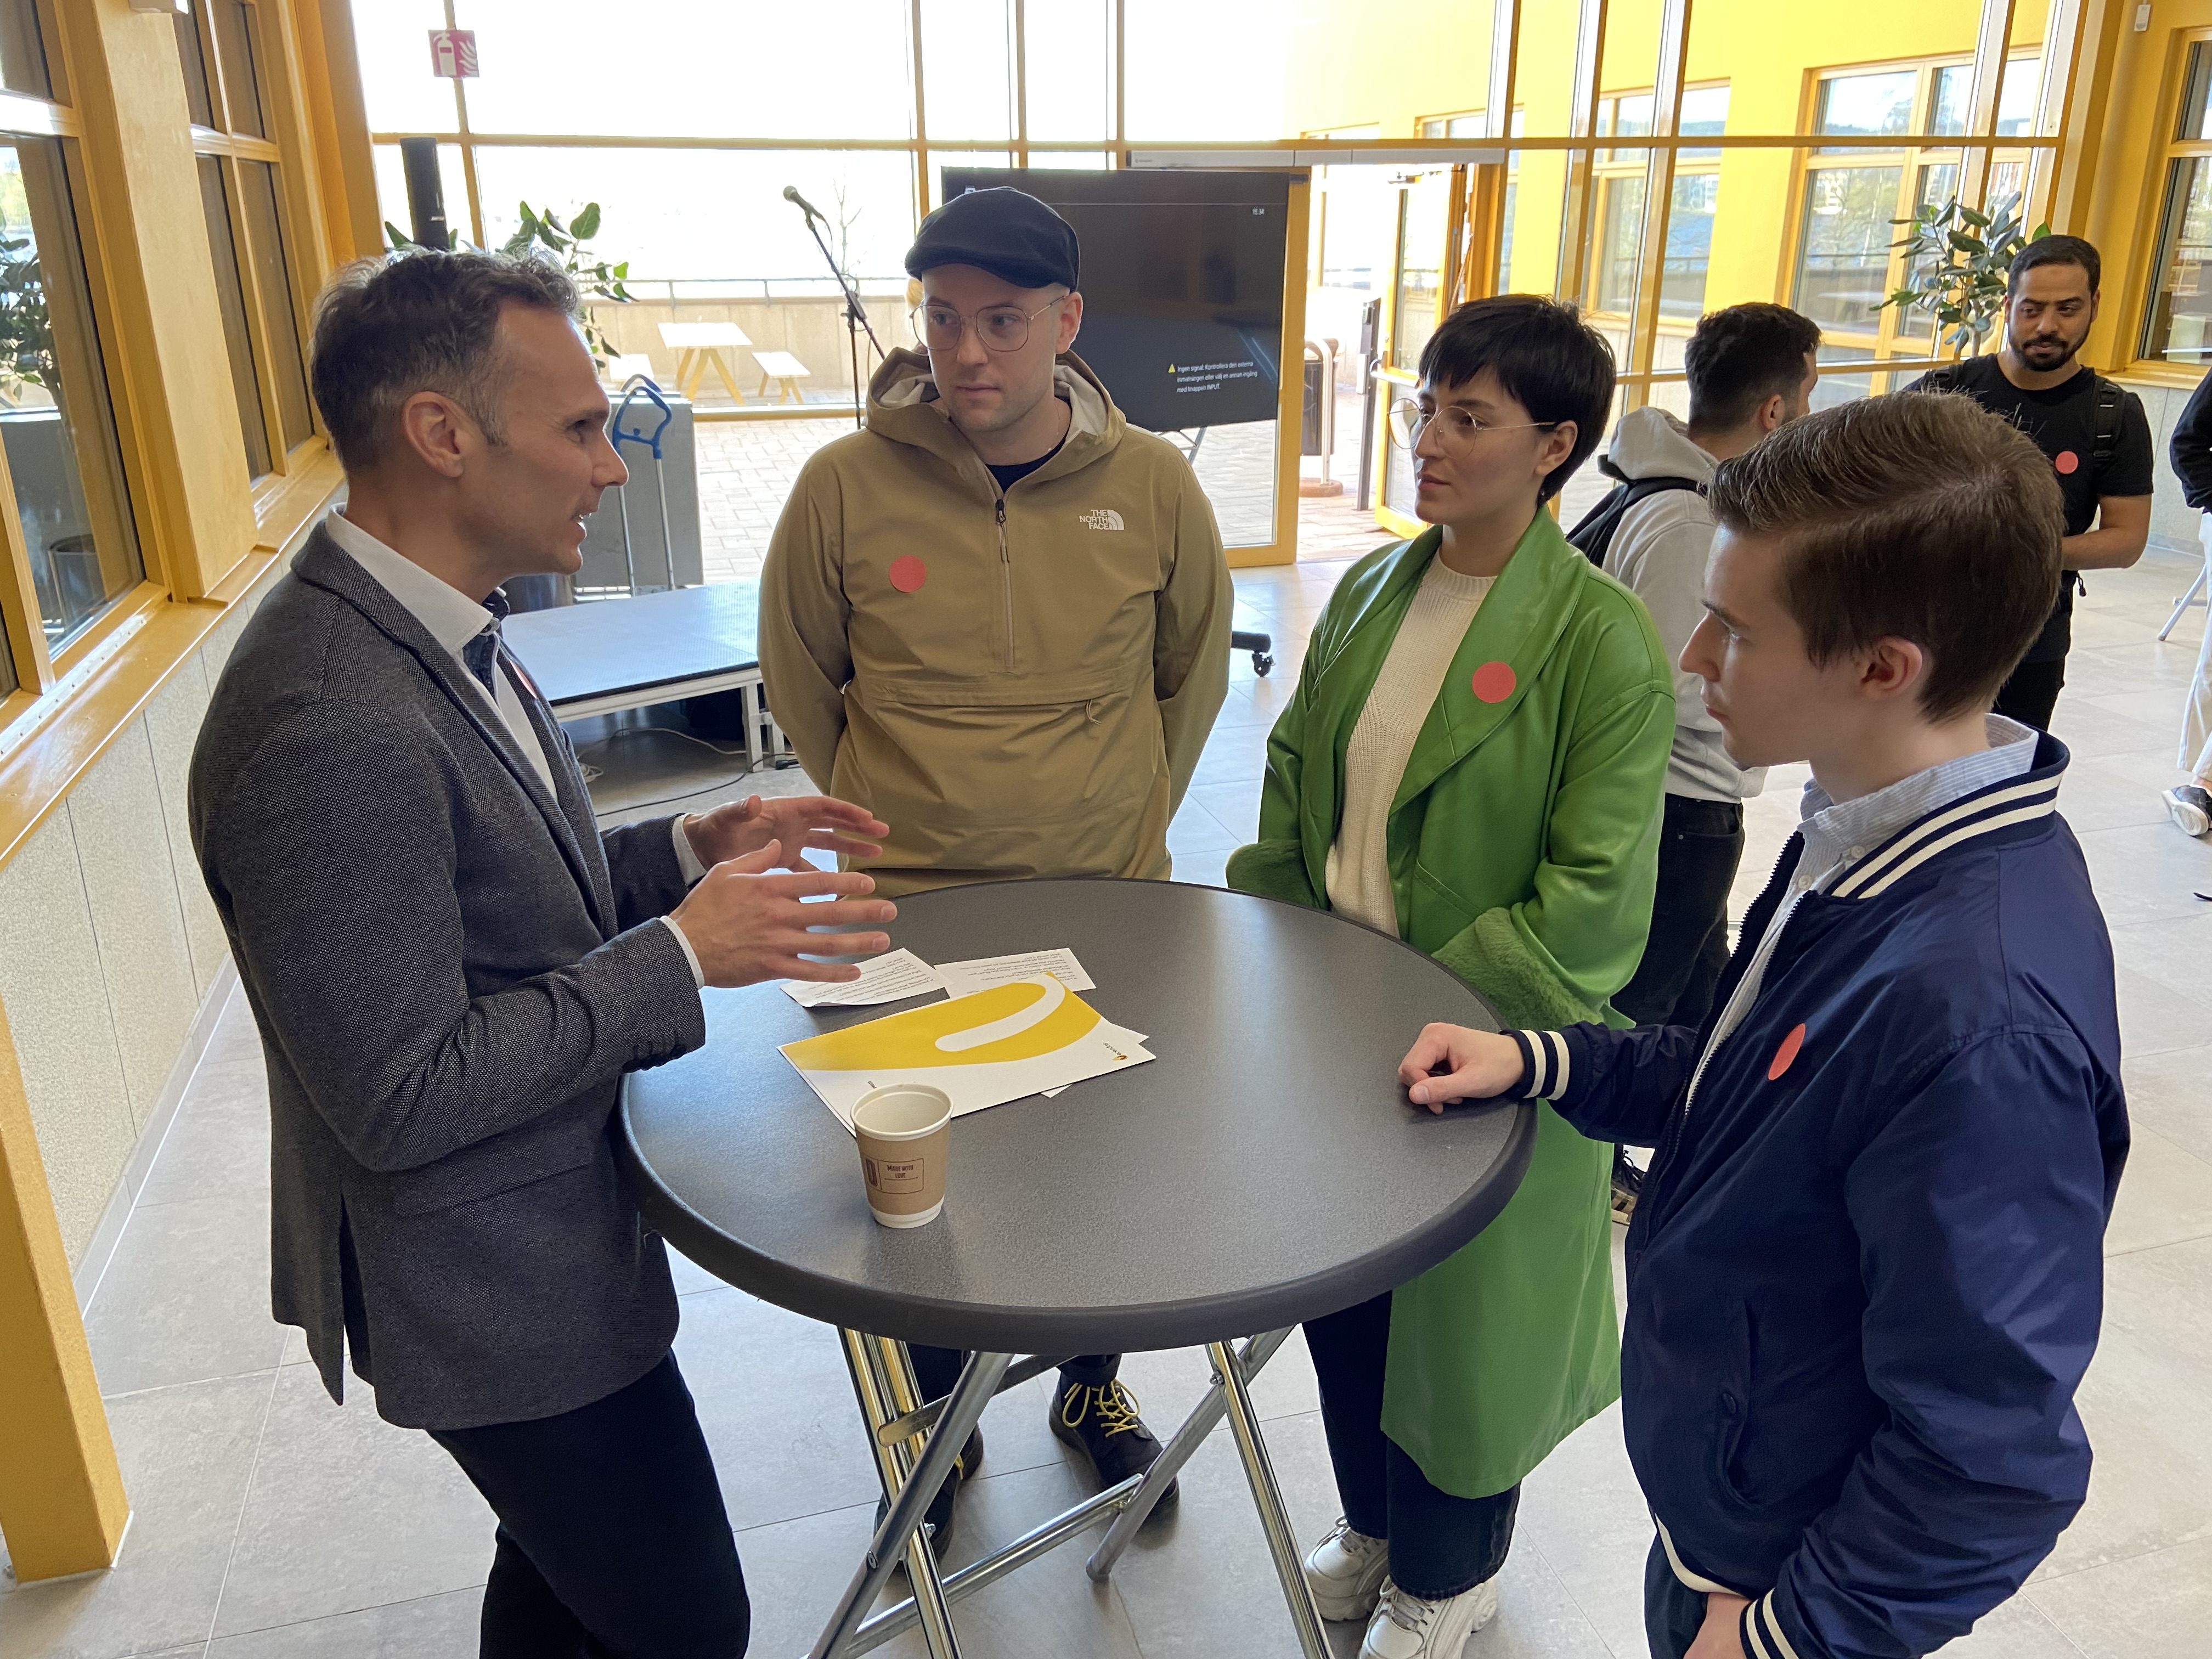 André Petzold, product owner at Verendus System, is mingling with the JTH students Gustav Persson, Sabina Ametova and Tim Lindström.